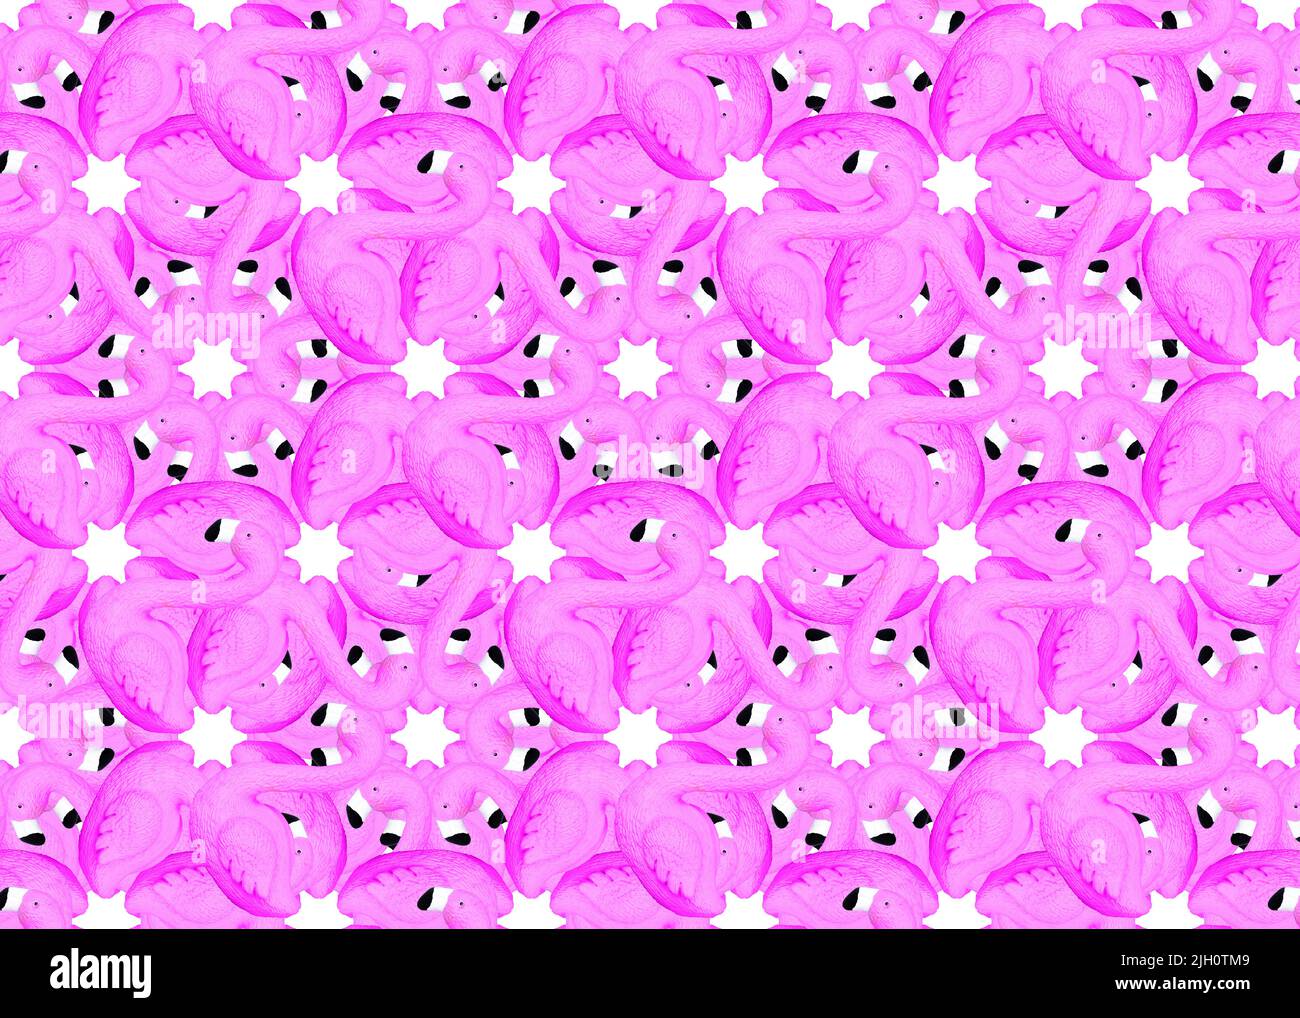 Pink flamingo and star circular pattern artistic background. Stock Photo